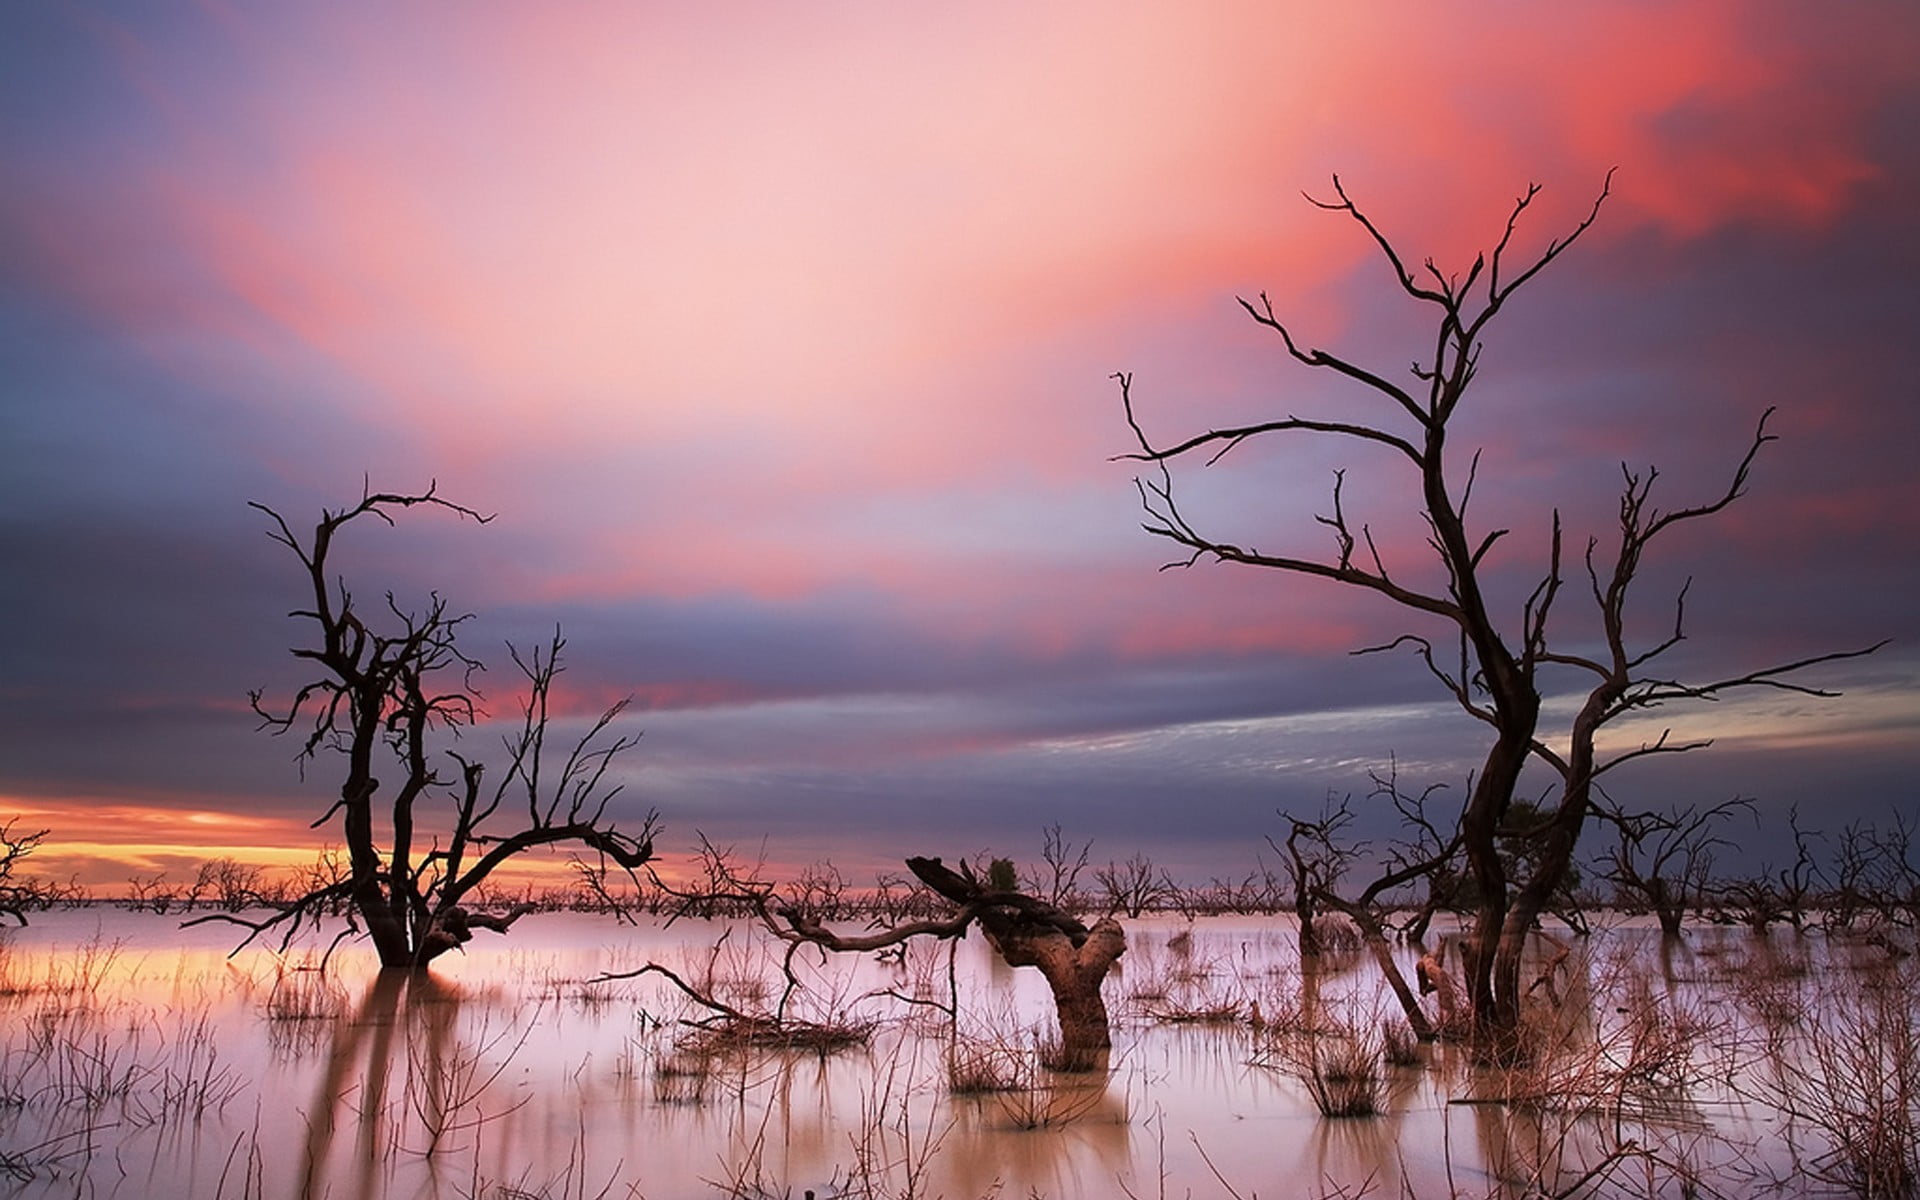 withered trees, landscape, water, swamp, sunset, sky, tranquility